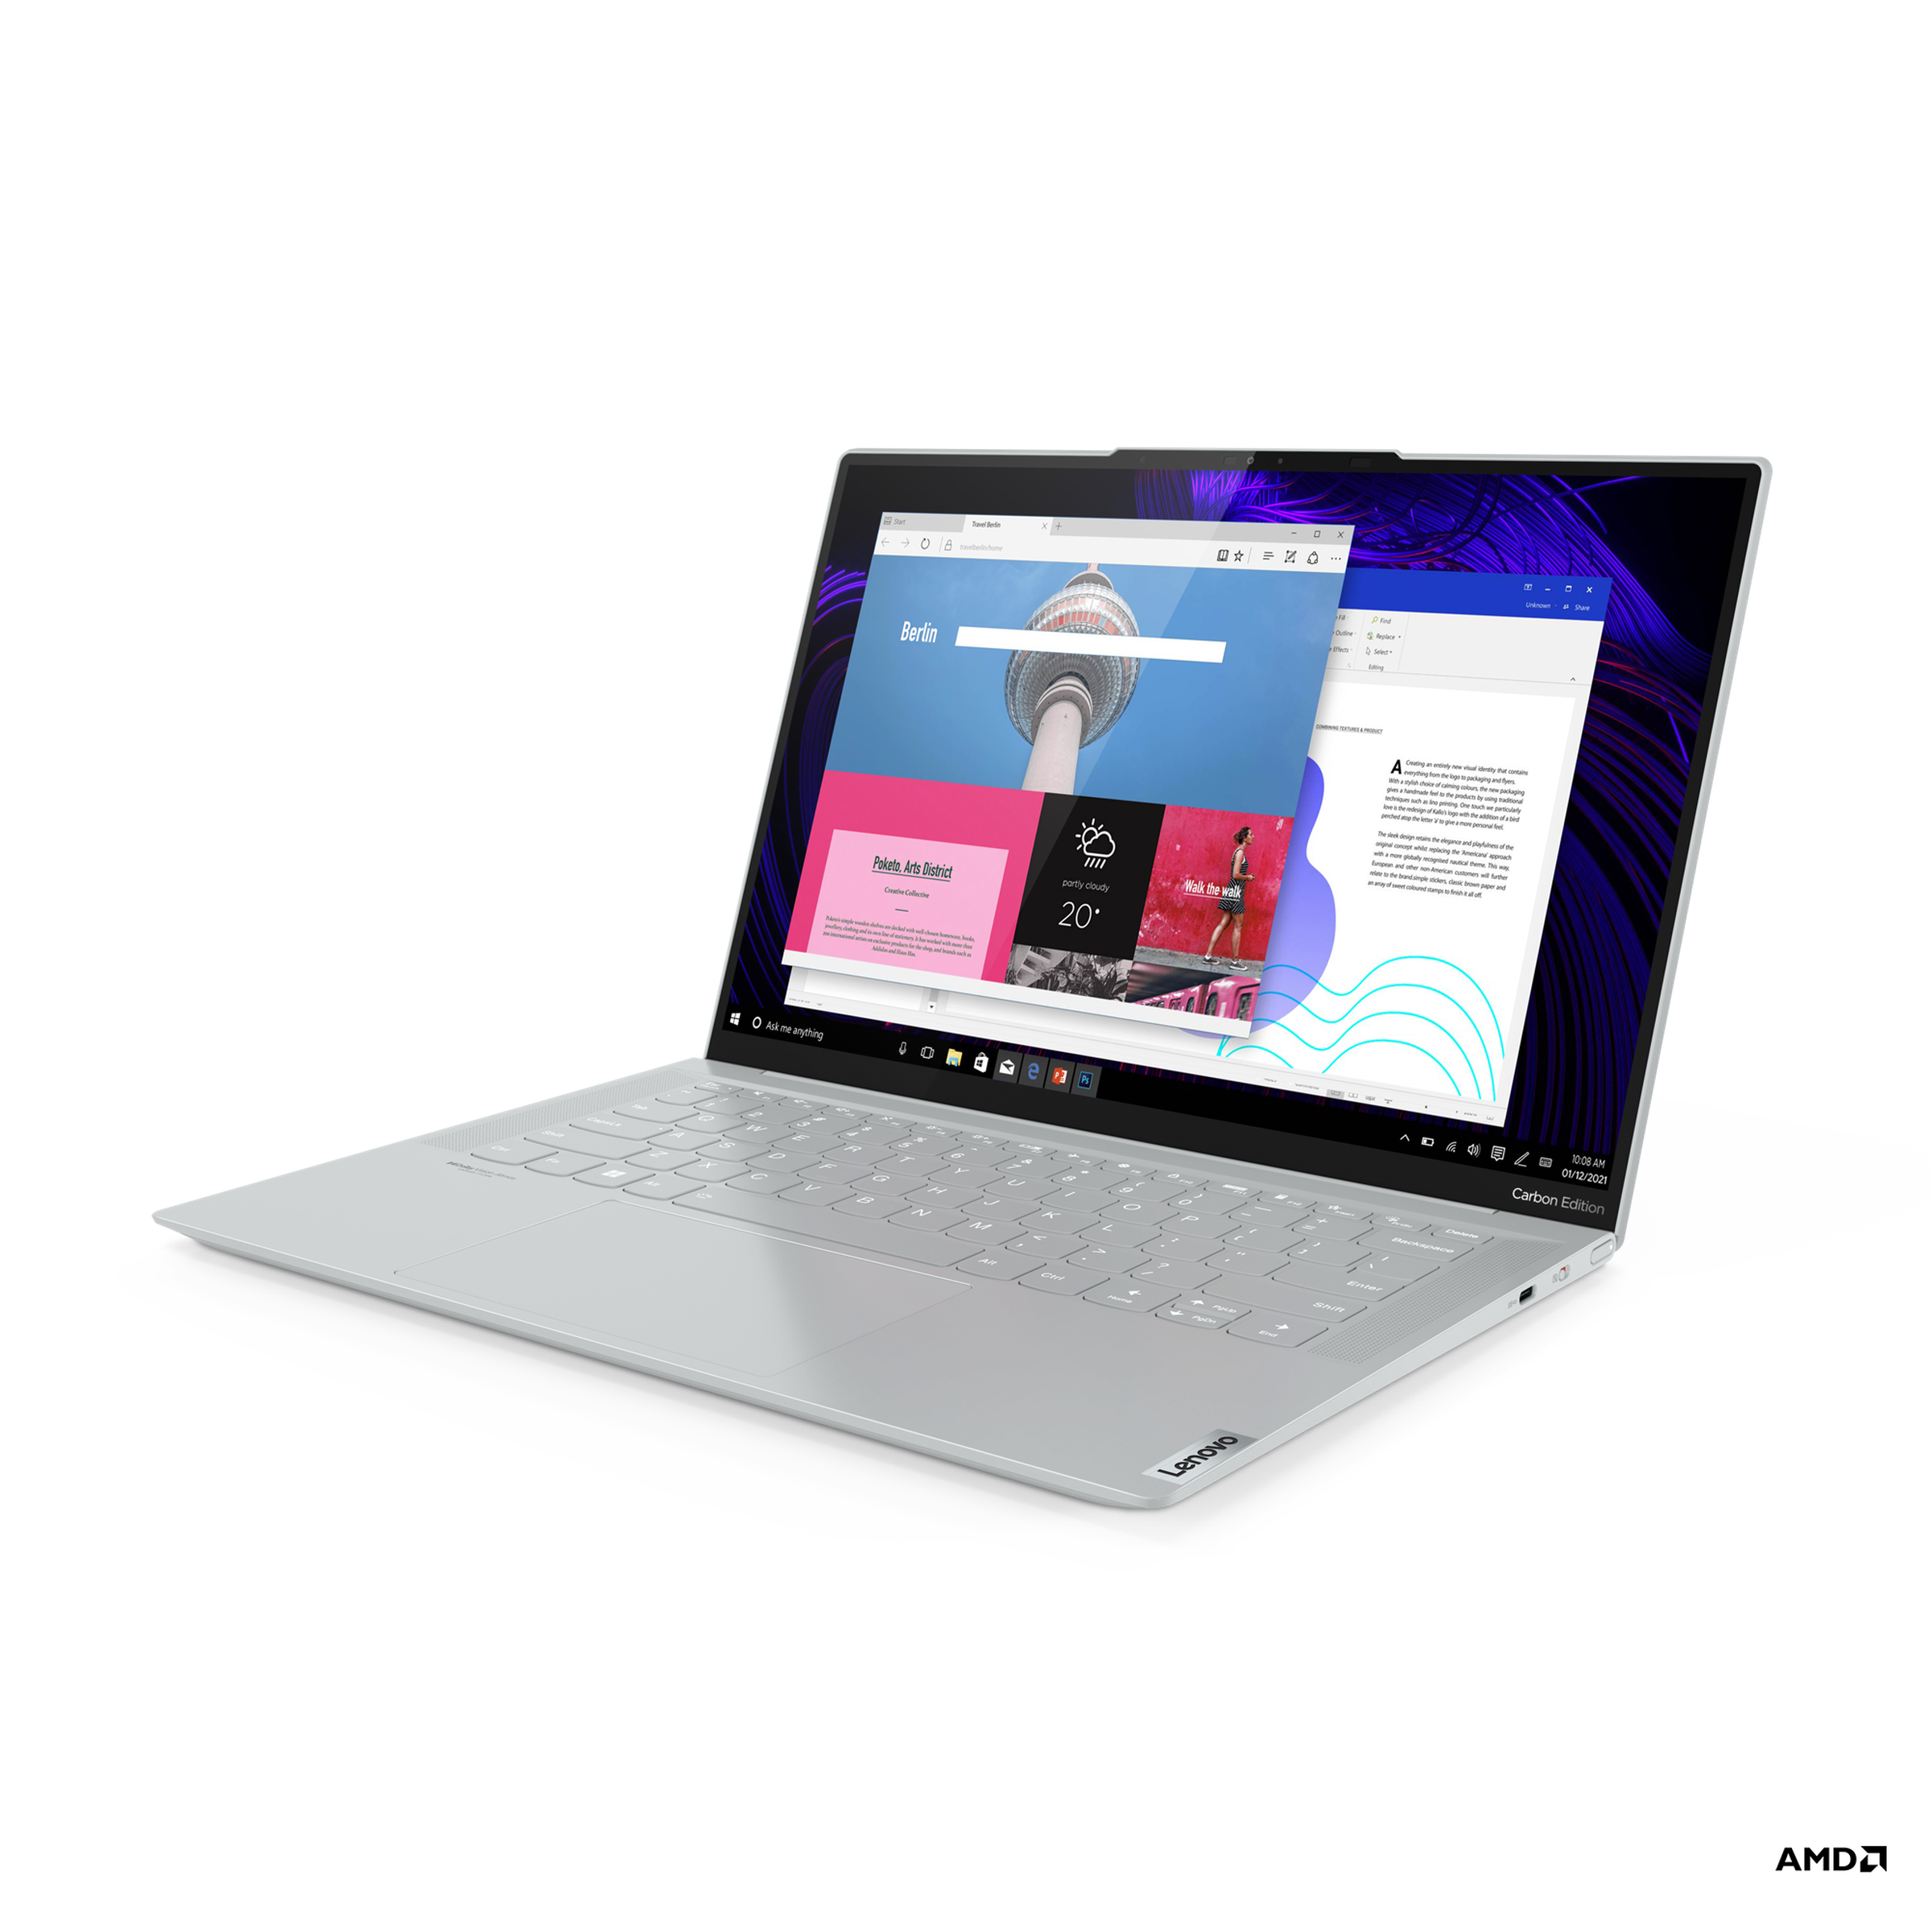 The IdeaPad Slim 7 Carbon open on a white background, facing left. The screen displays two windowed apps on a black and purple background.